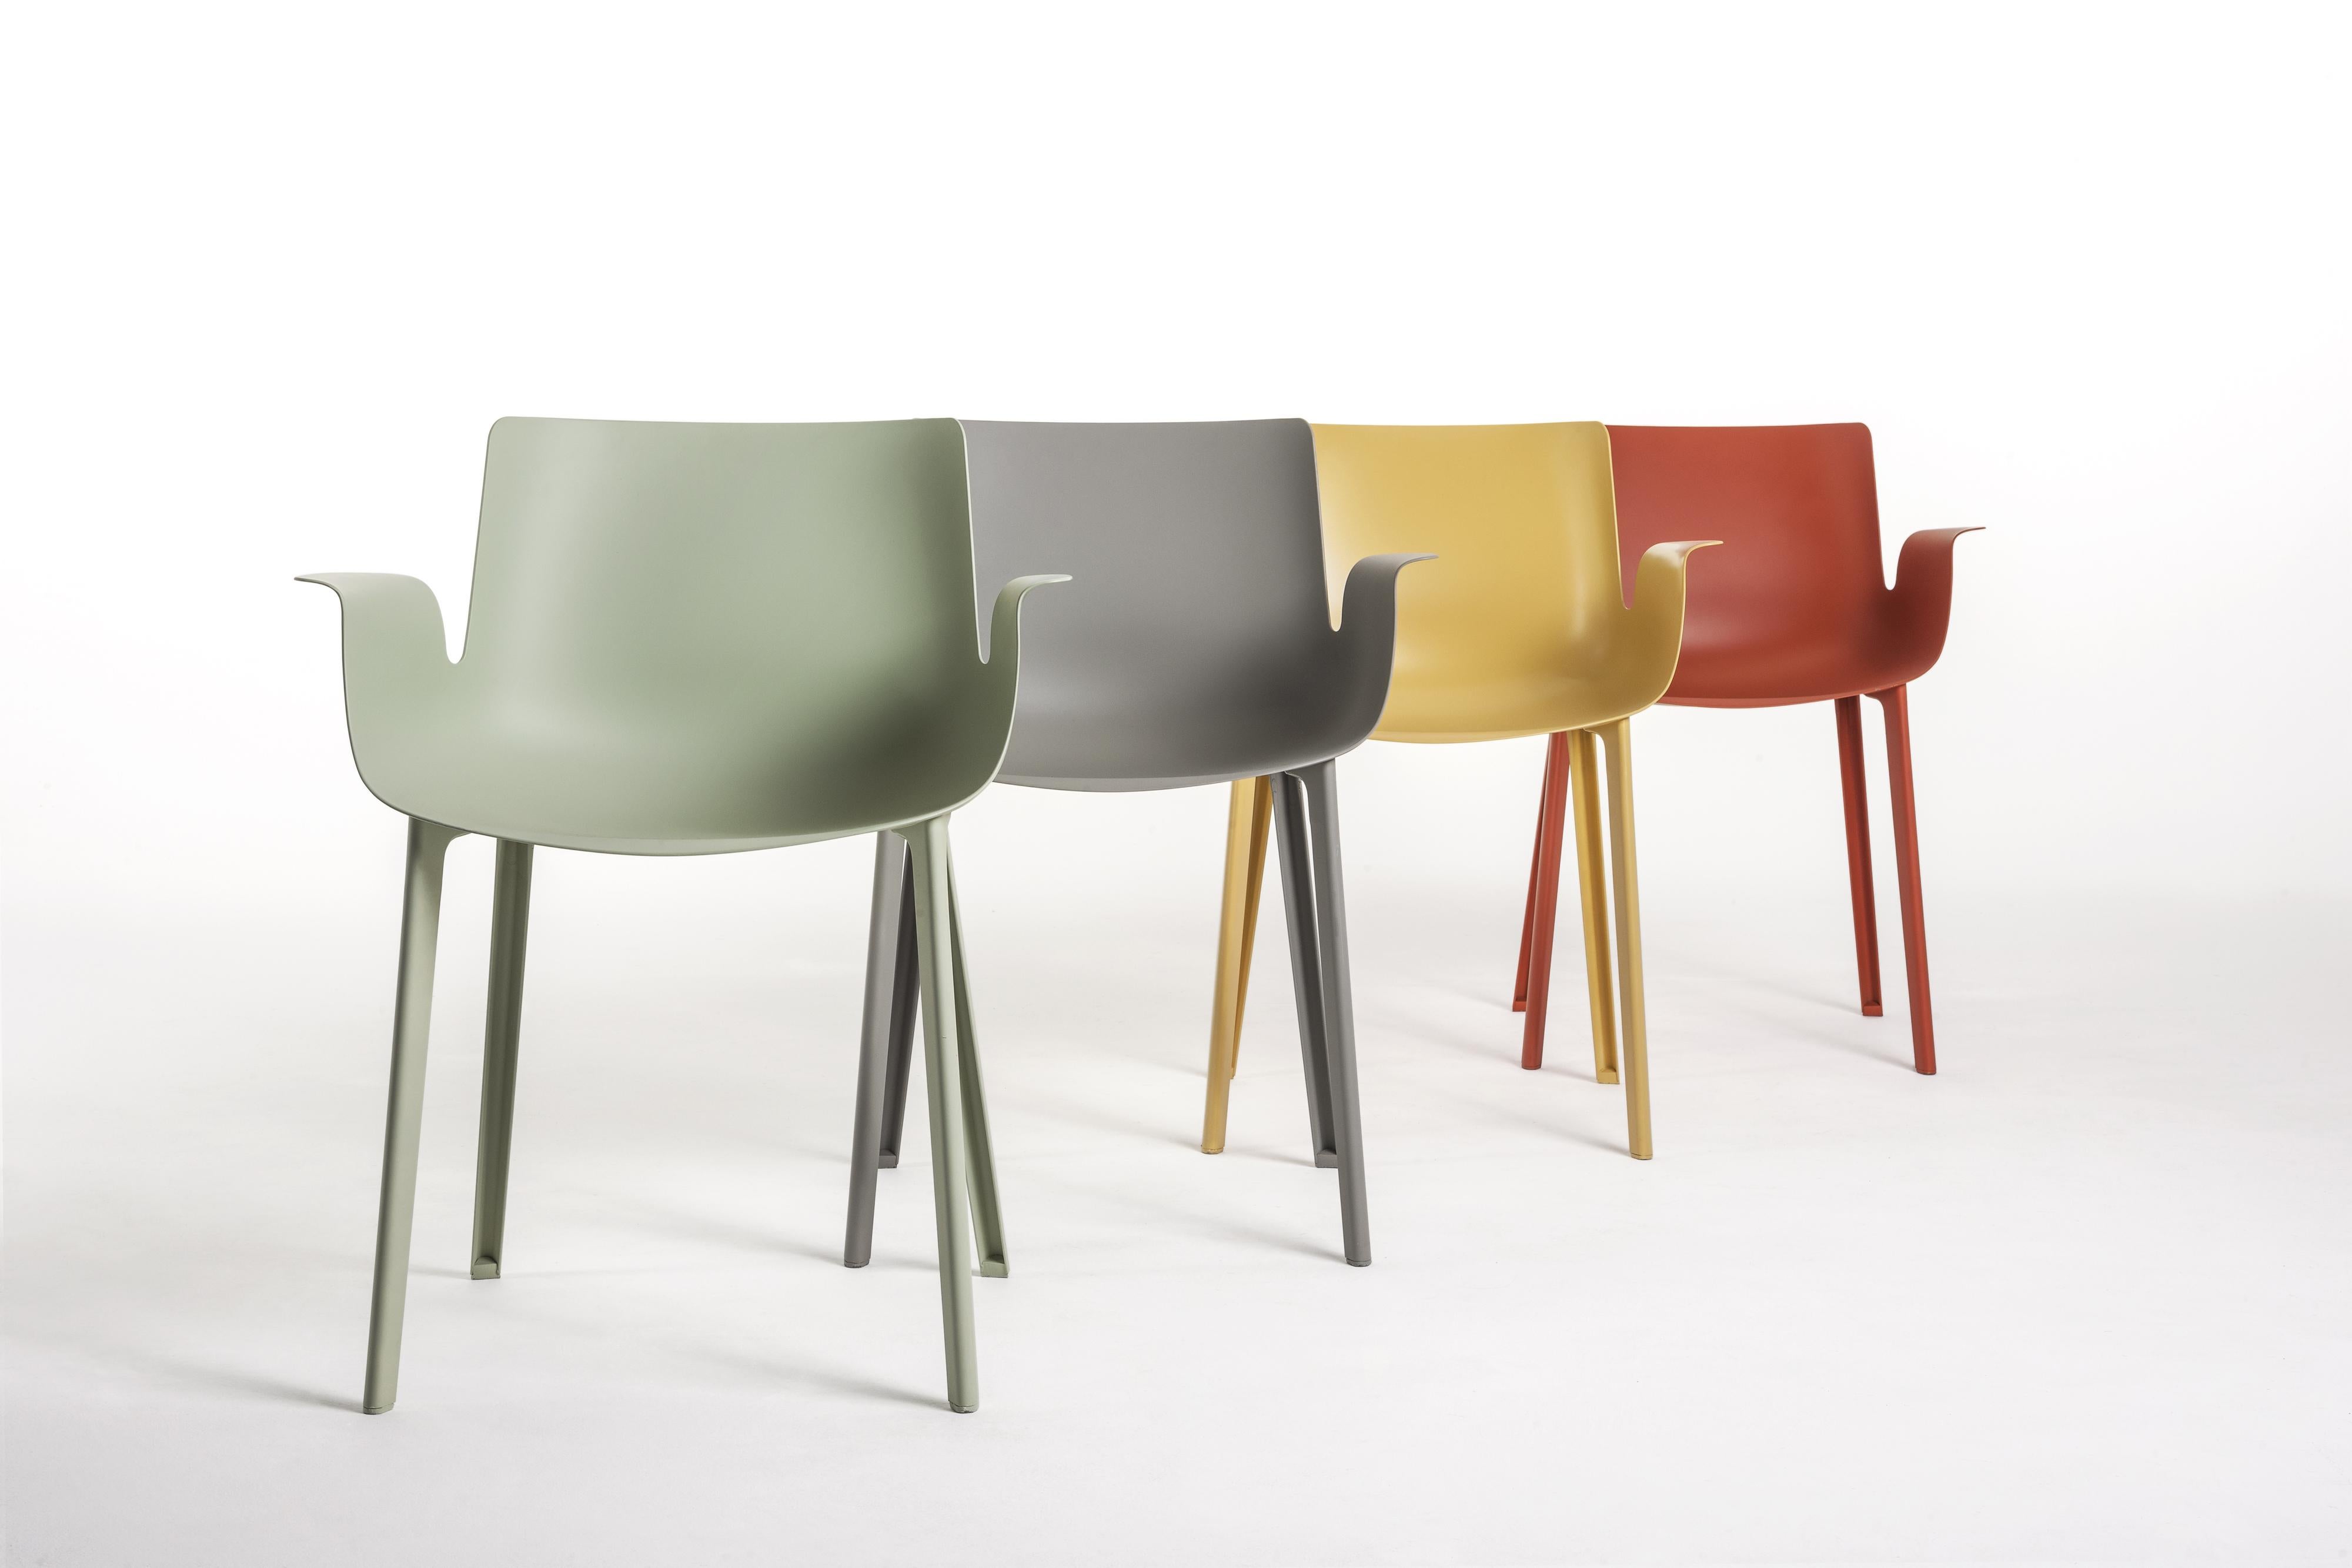 2016 saw the completion of the “Piuma” project by Piero Lissoni. The chair is one of the most revolutionary and enterprising products in Kartell’s repertoire of technology and materials. By applying its injection molding techniques in a